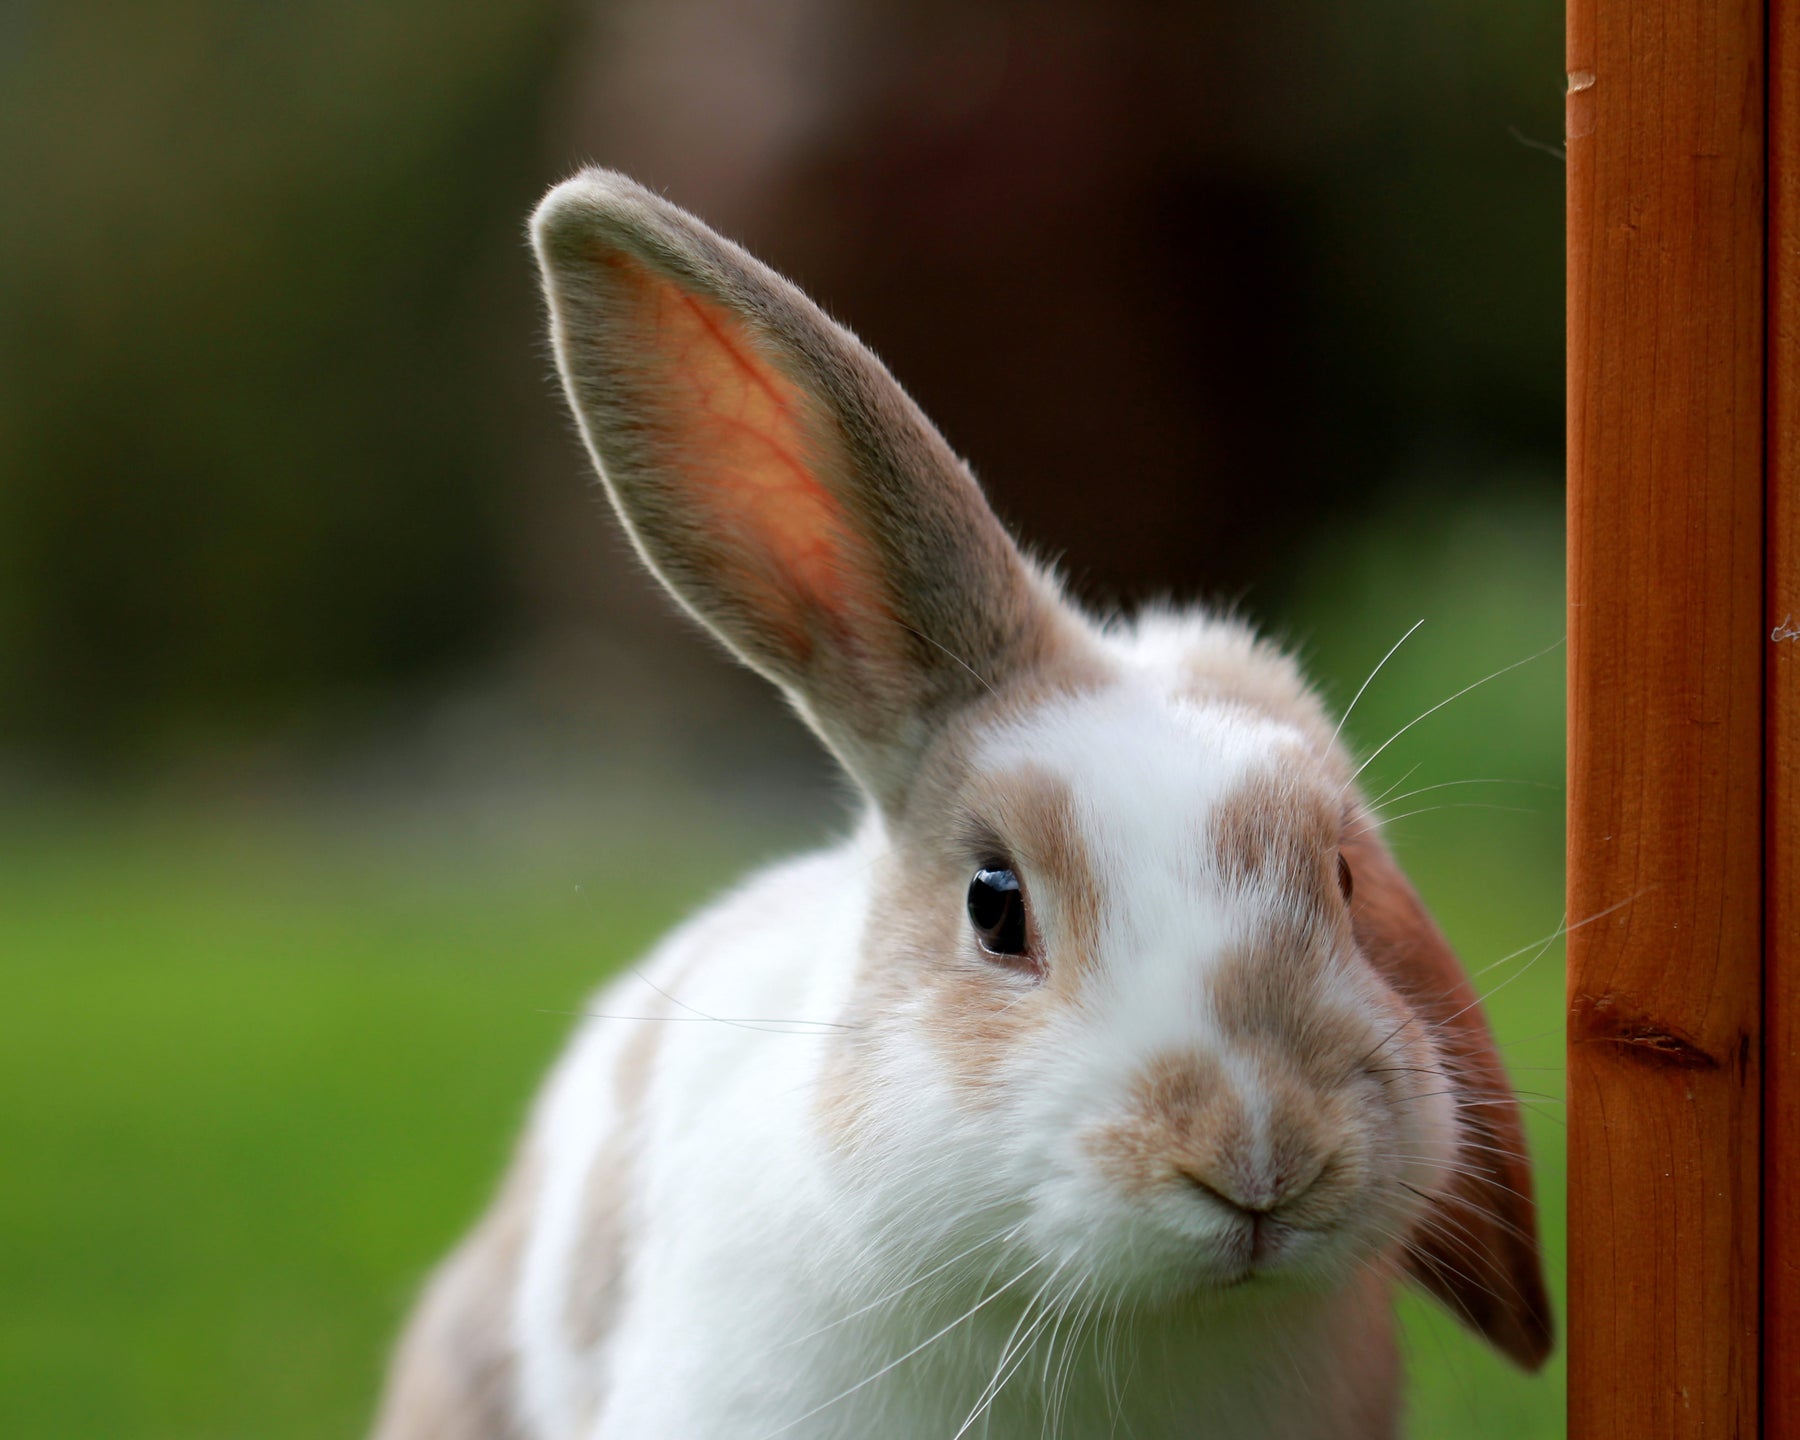 A Beginner's Guide to Caring for Small Animals: Rabbits, Guinea Pigs, and More